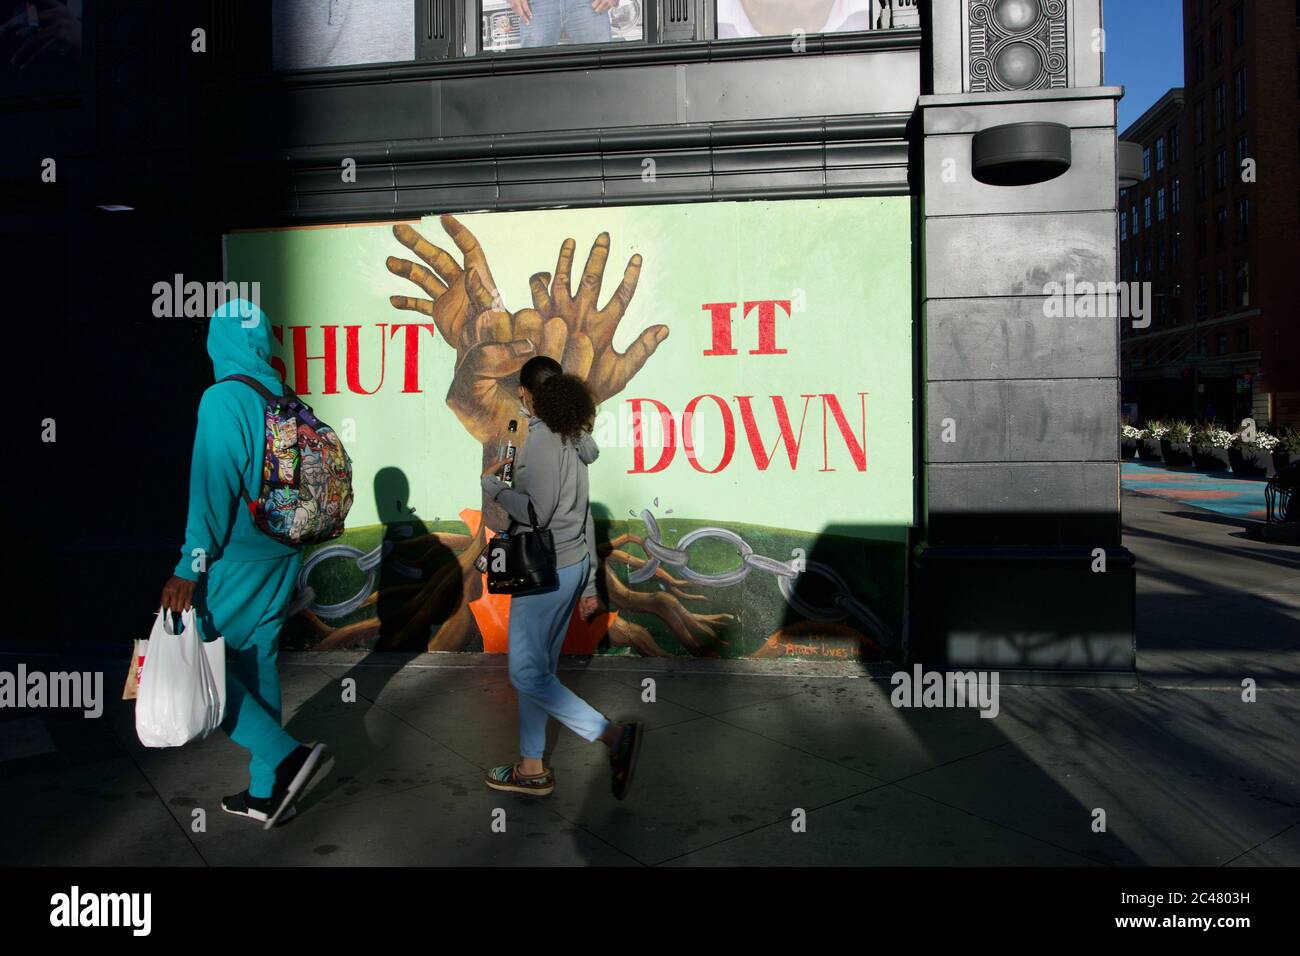 Pedestrians pass Black Lives Matter street art that says 'Shut It Down' on boarded up building after death of George Floyd. Downtown Oakland, CA, USA Stock Photo